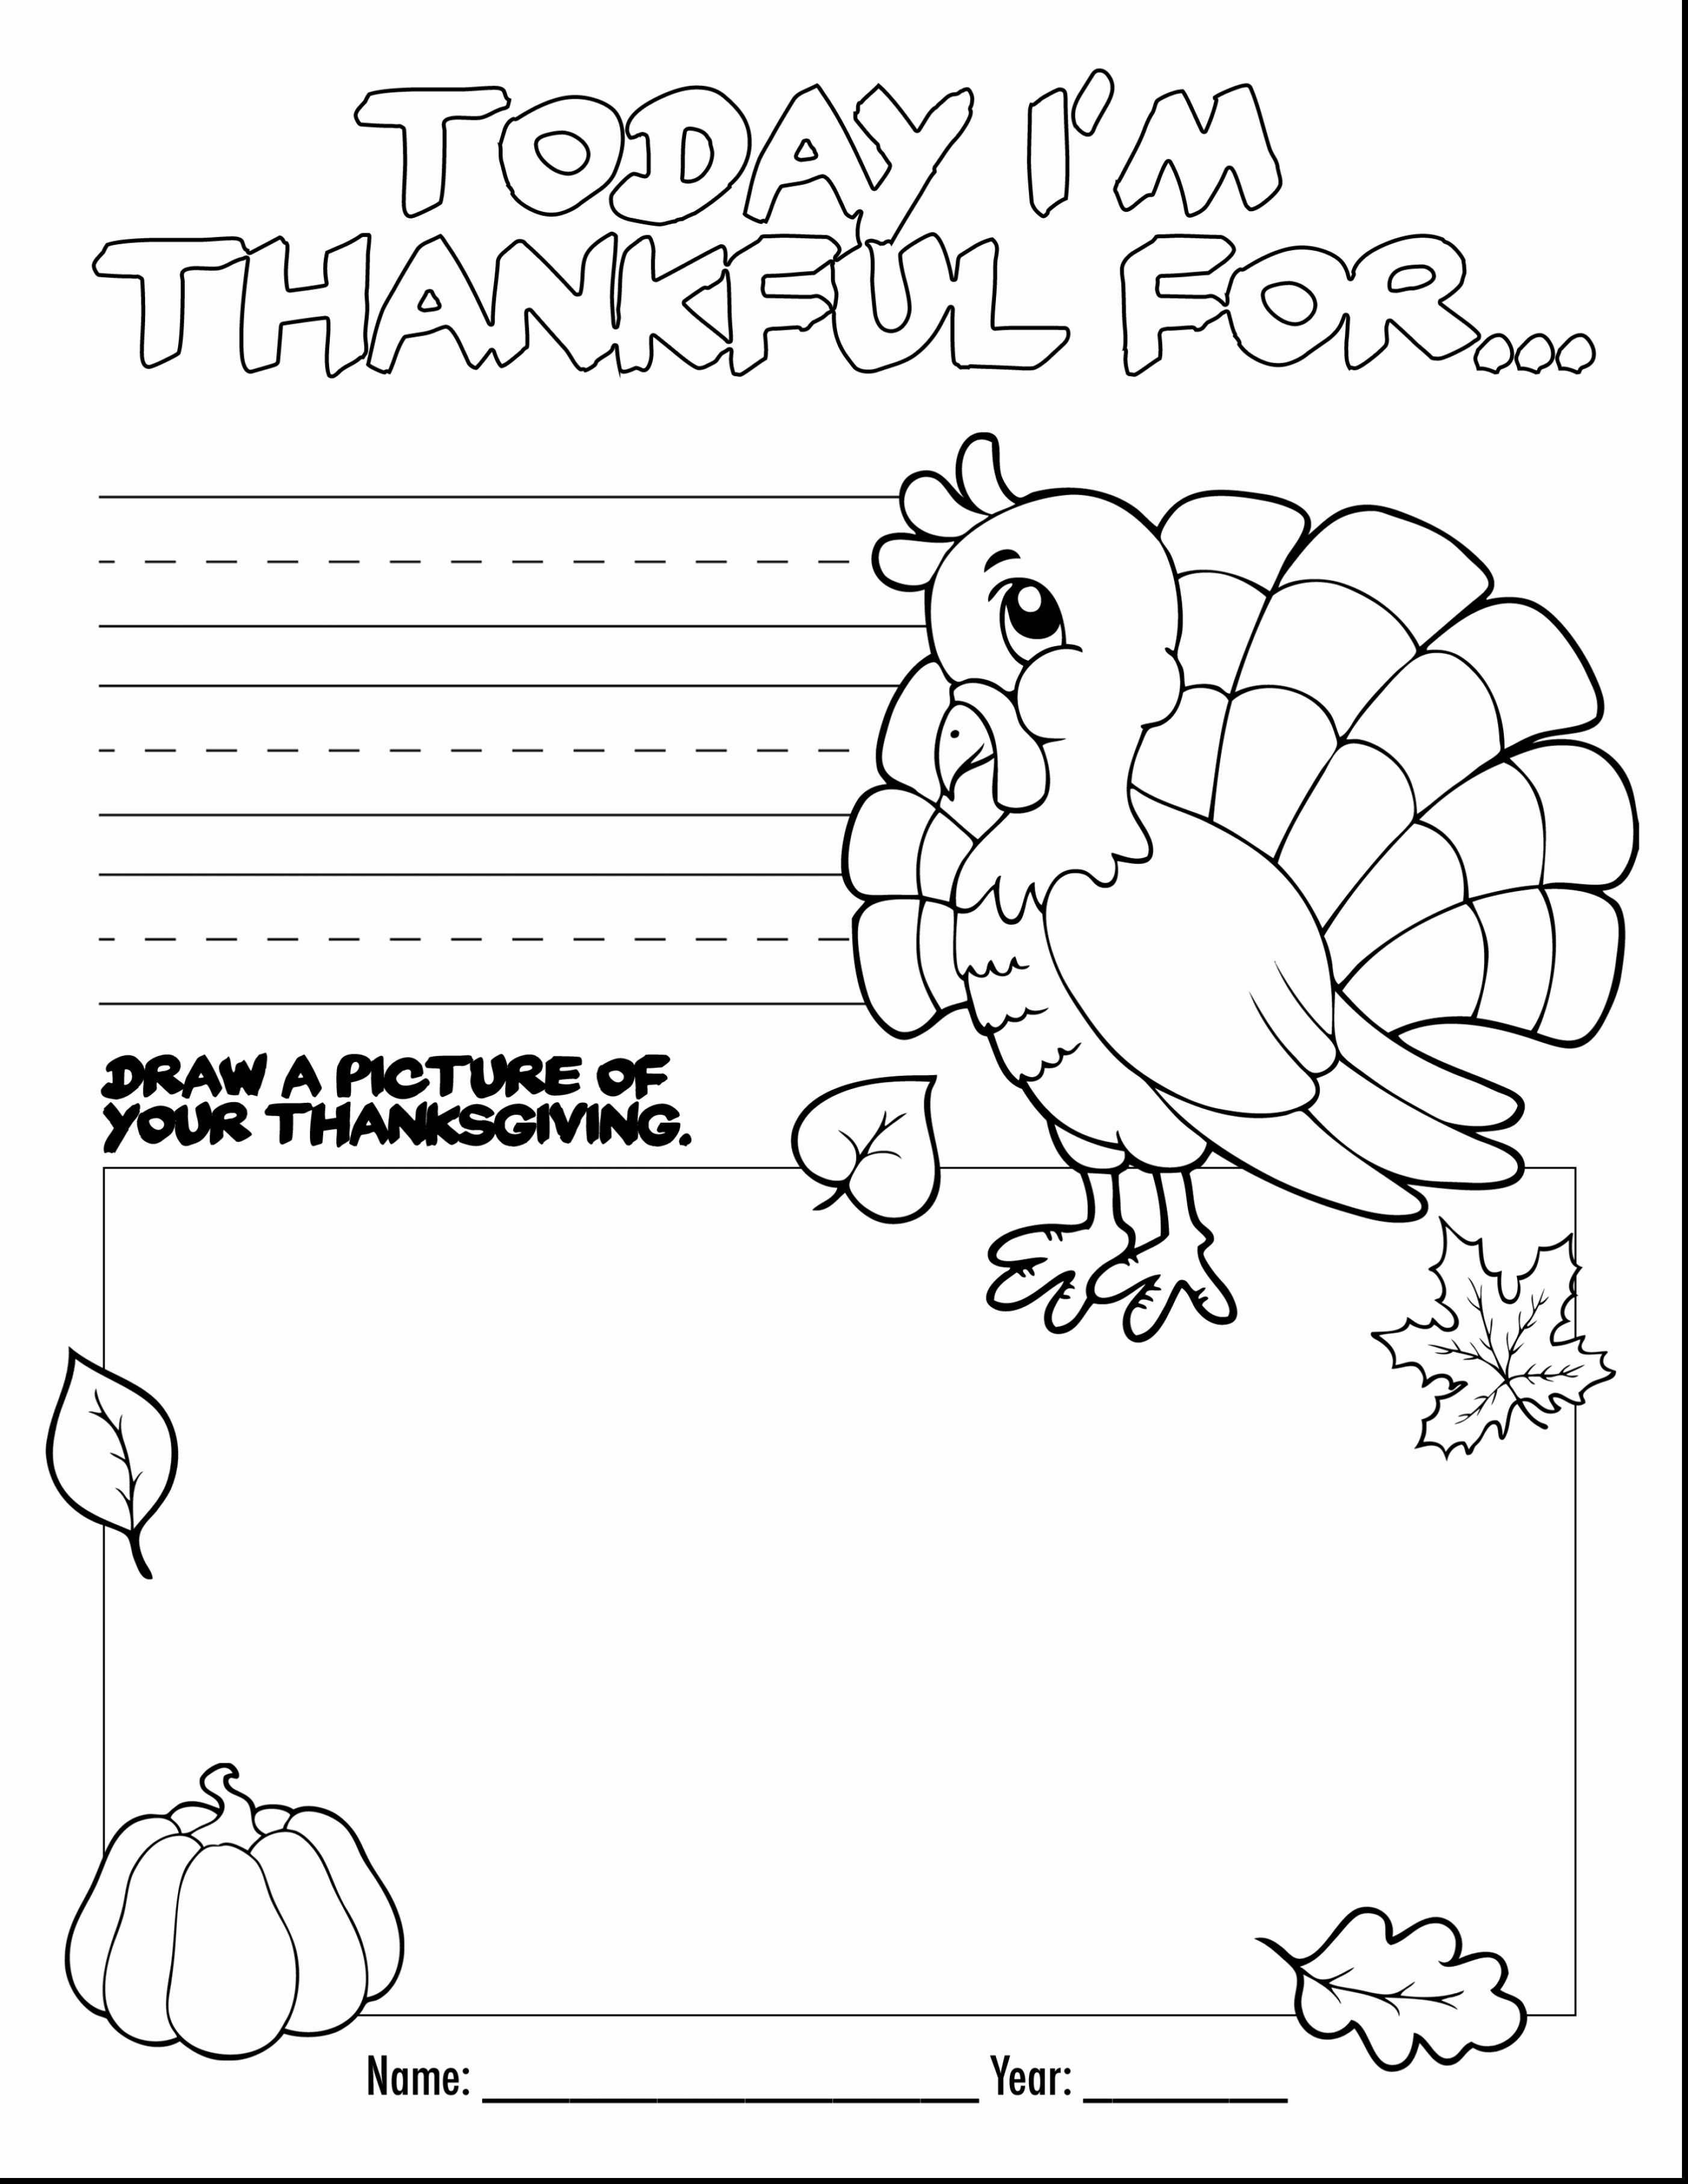 Preschool Turkey Coloring Pages 22 Free Thanksgiving Coloring Pages For Preschoolers Gallery